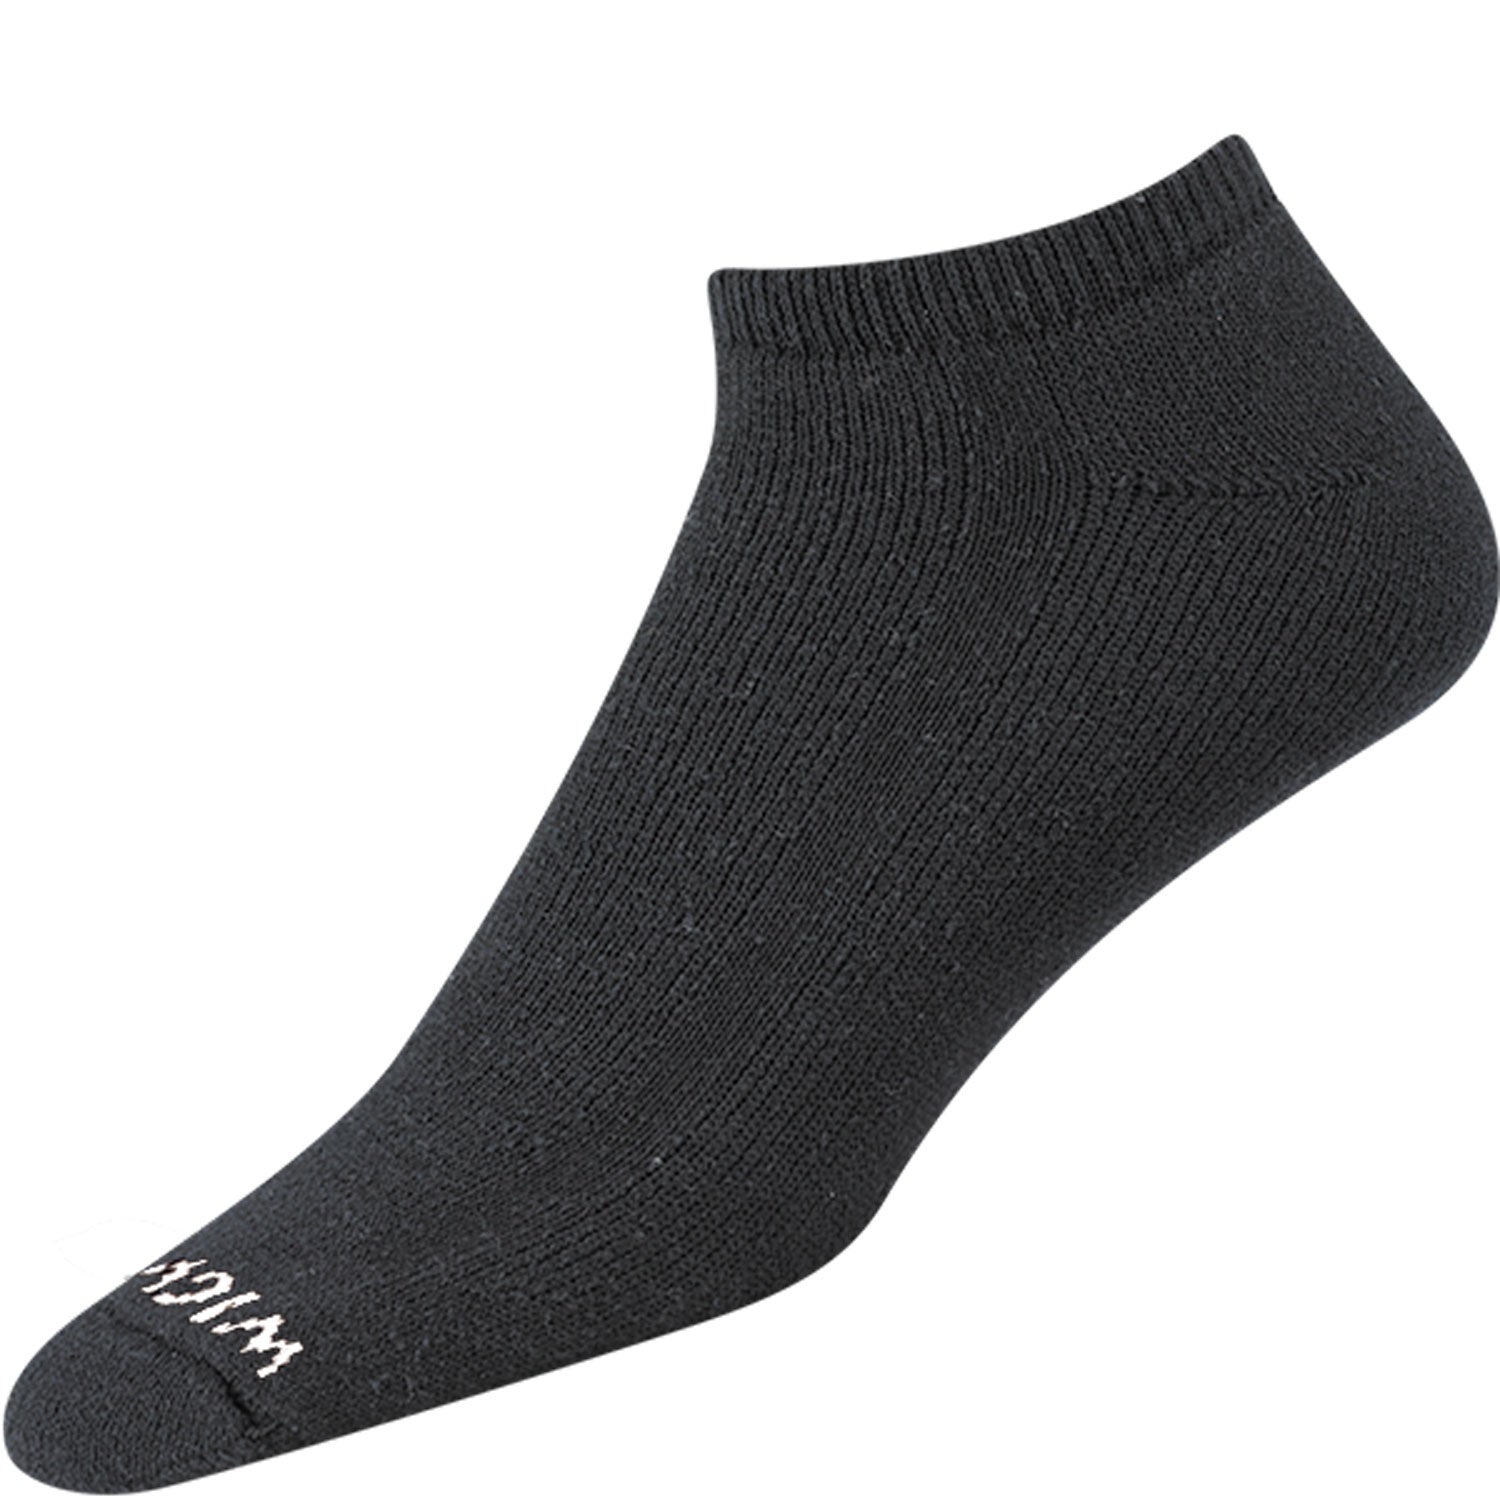 Super 60® Low-Cut 3-Pack Midweight Cotton Socks - Black full product perspective - made in The USA Wigwam Socks